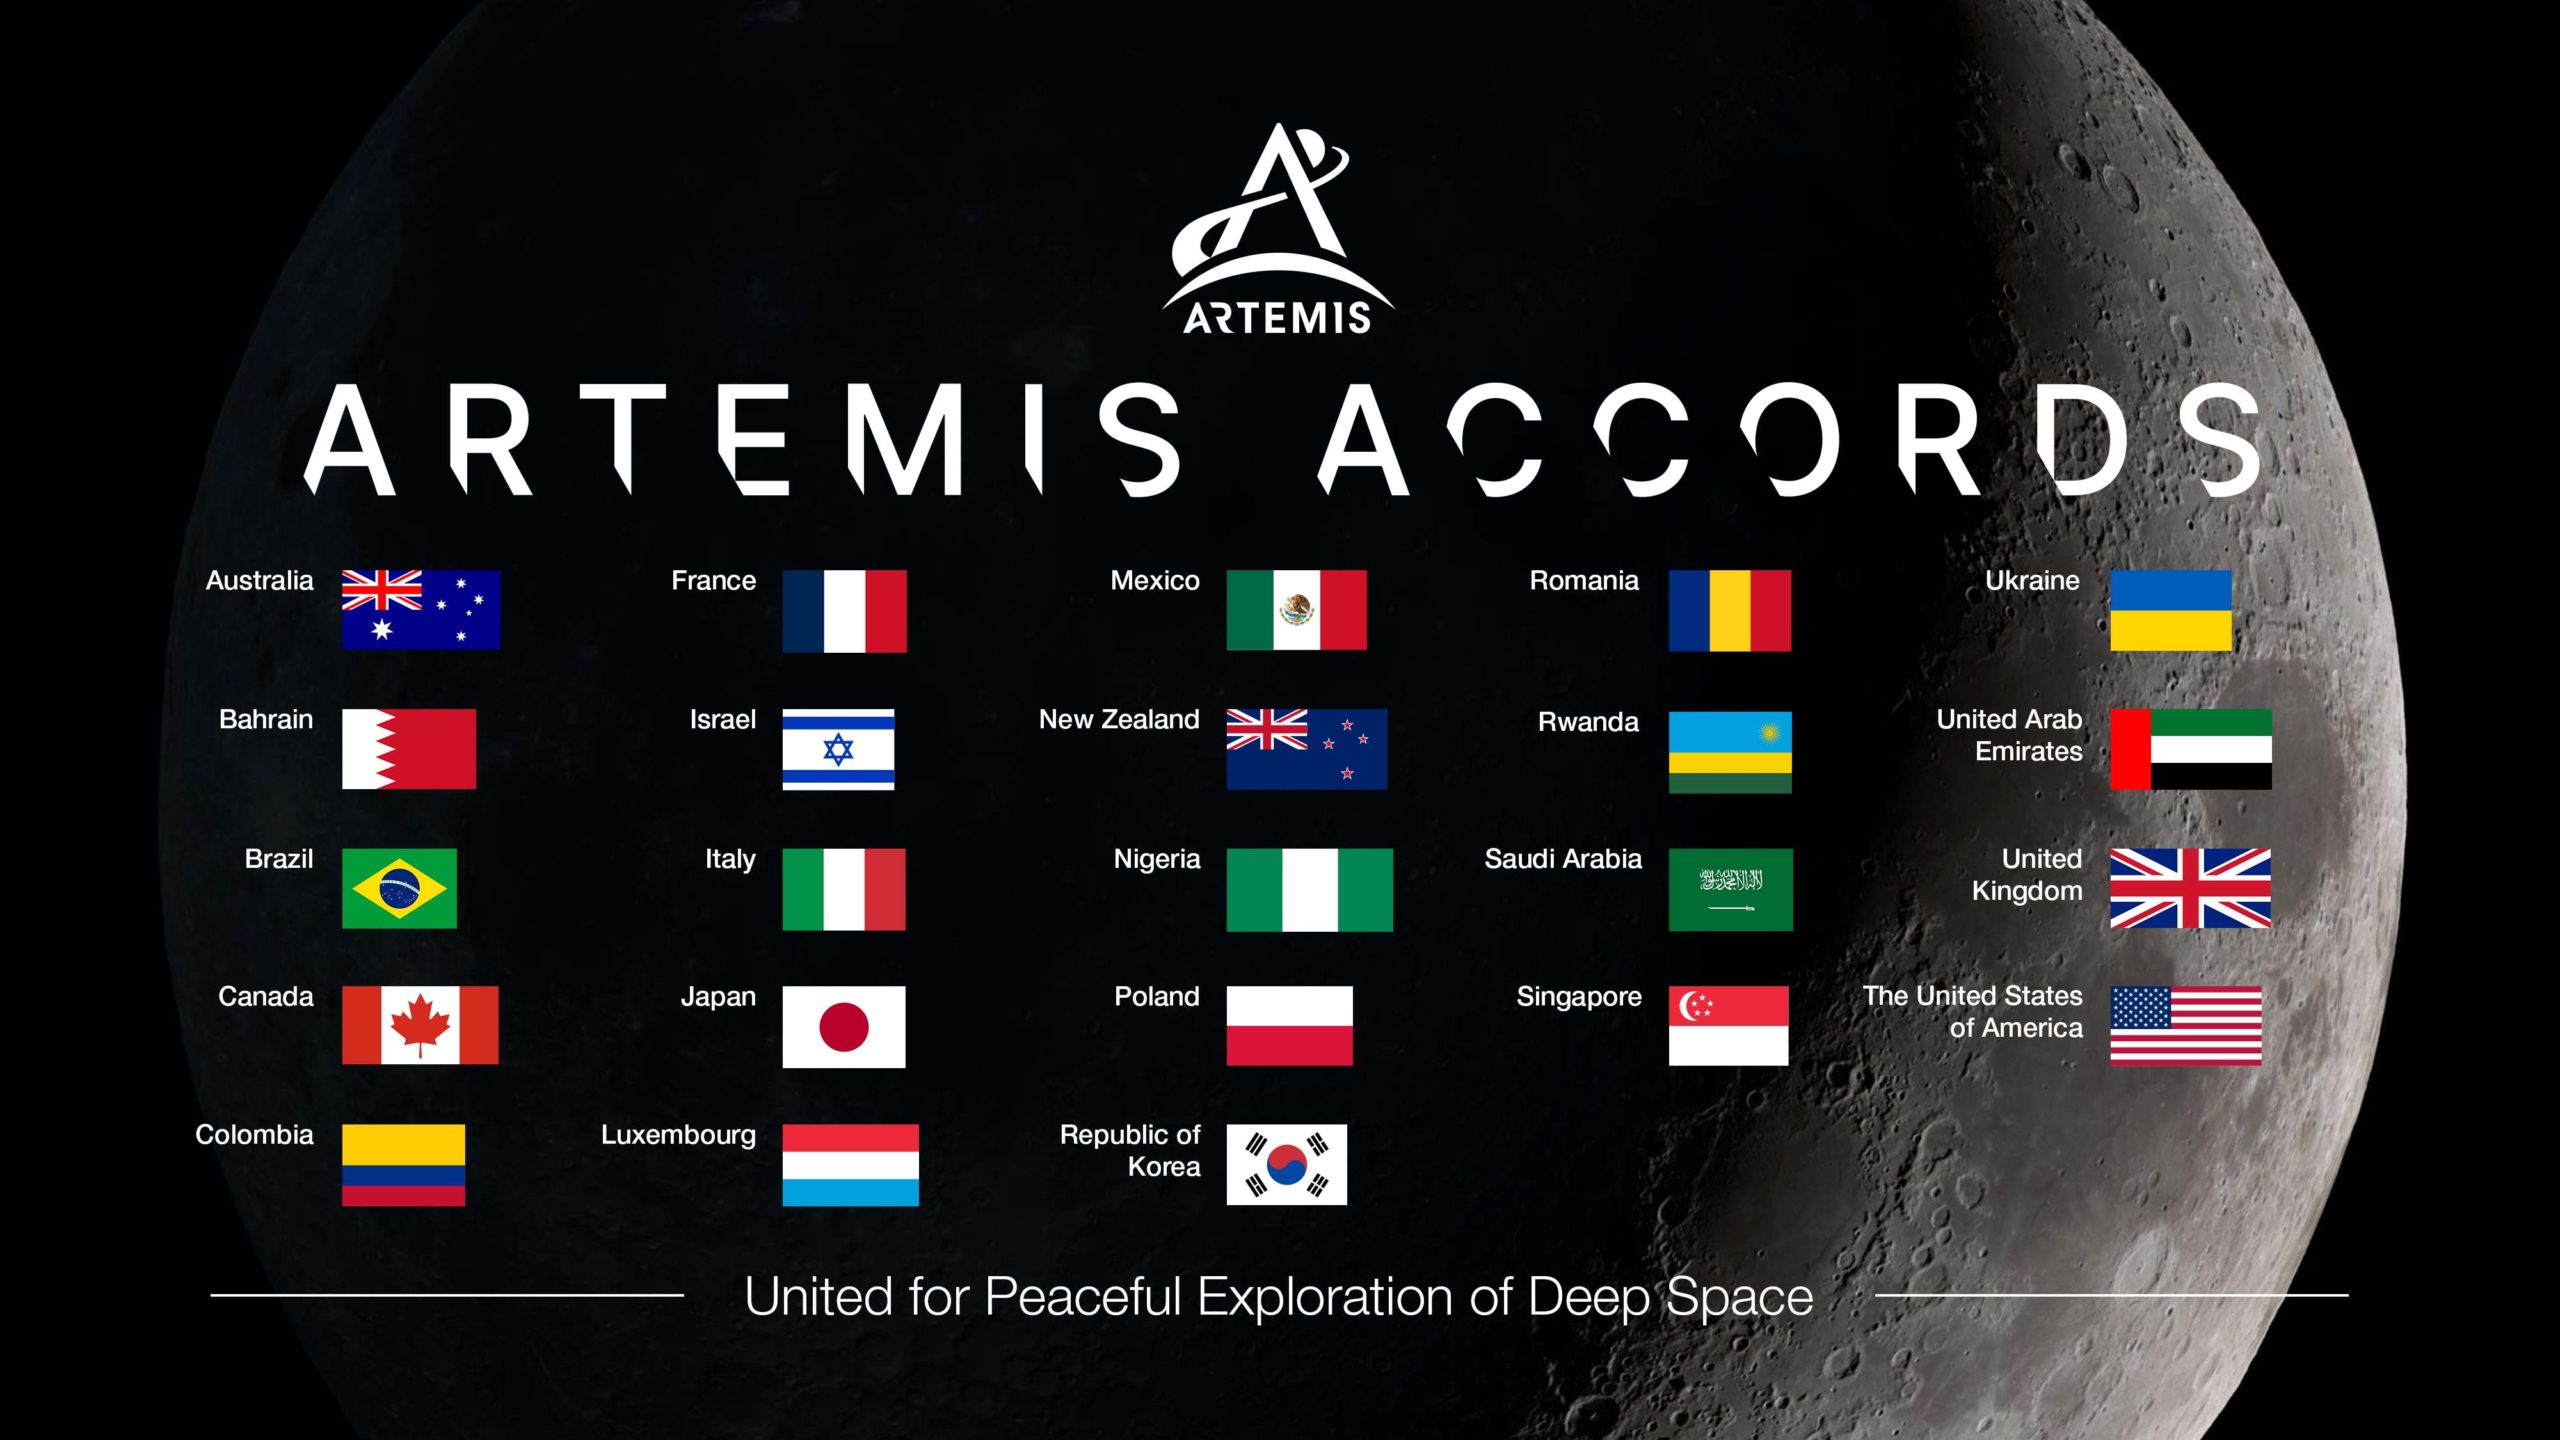  What Are The Artemis Accords?